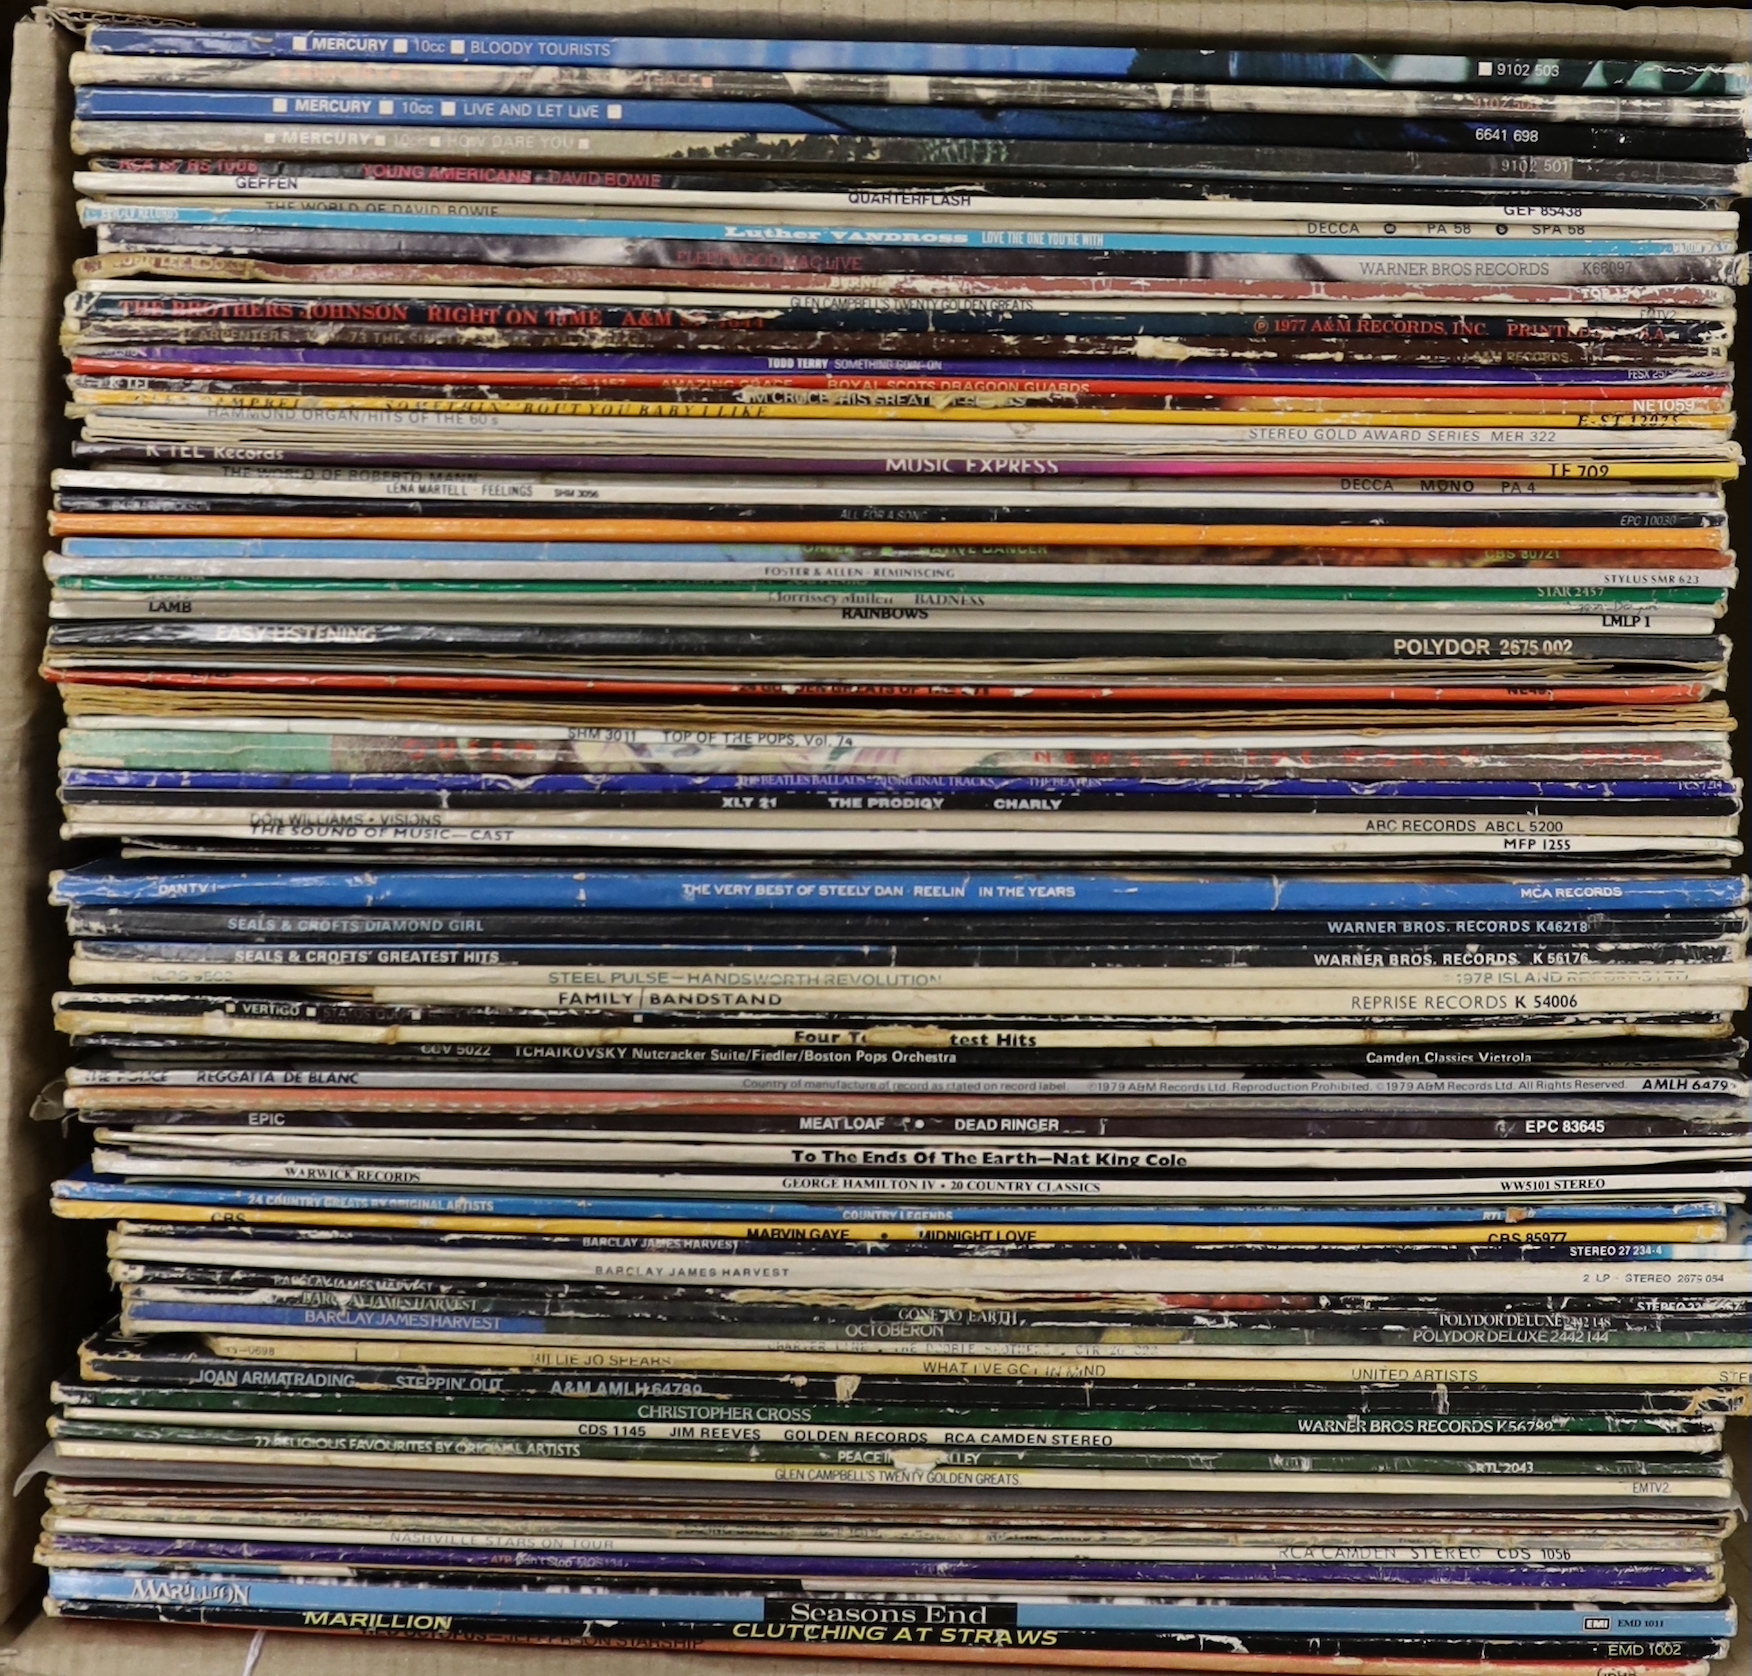 Eighty mostly 1970's/80's LPs etc., including Marillion, Jim Reeves, Barclay James Harvest, Meat Loaf, Steely Dan, Queen, Fleetwood Mac, David Bowie, 10cc, etc.